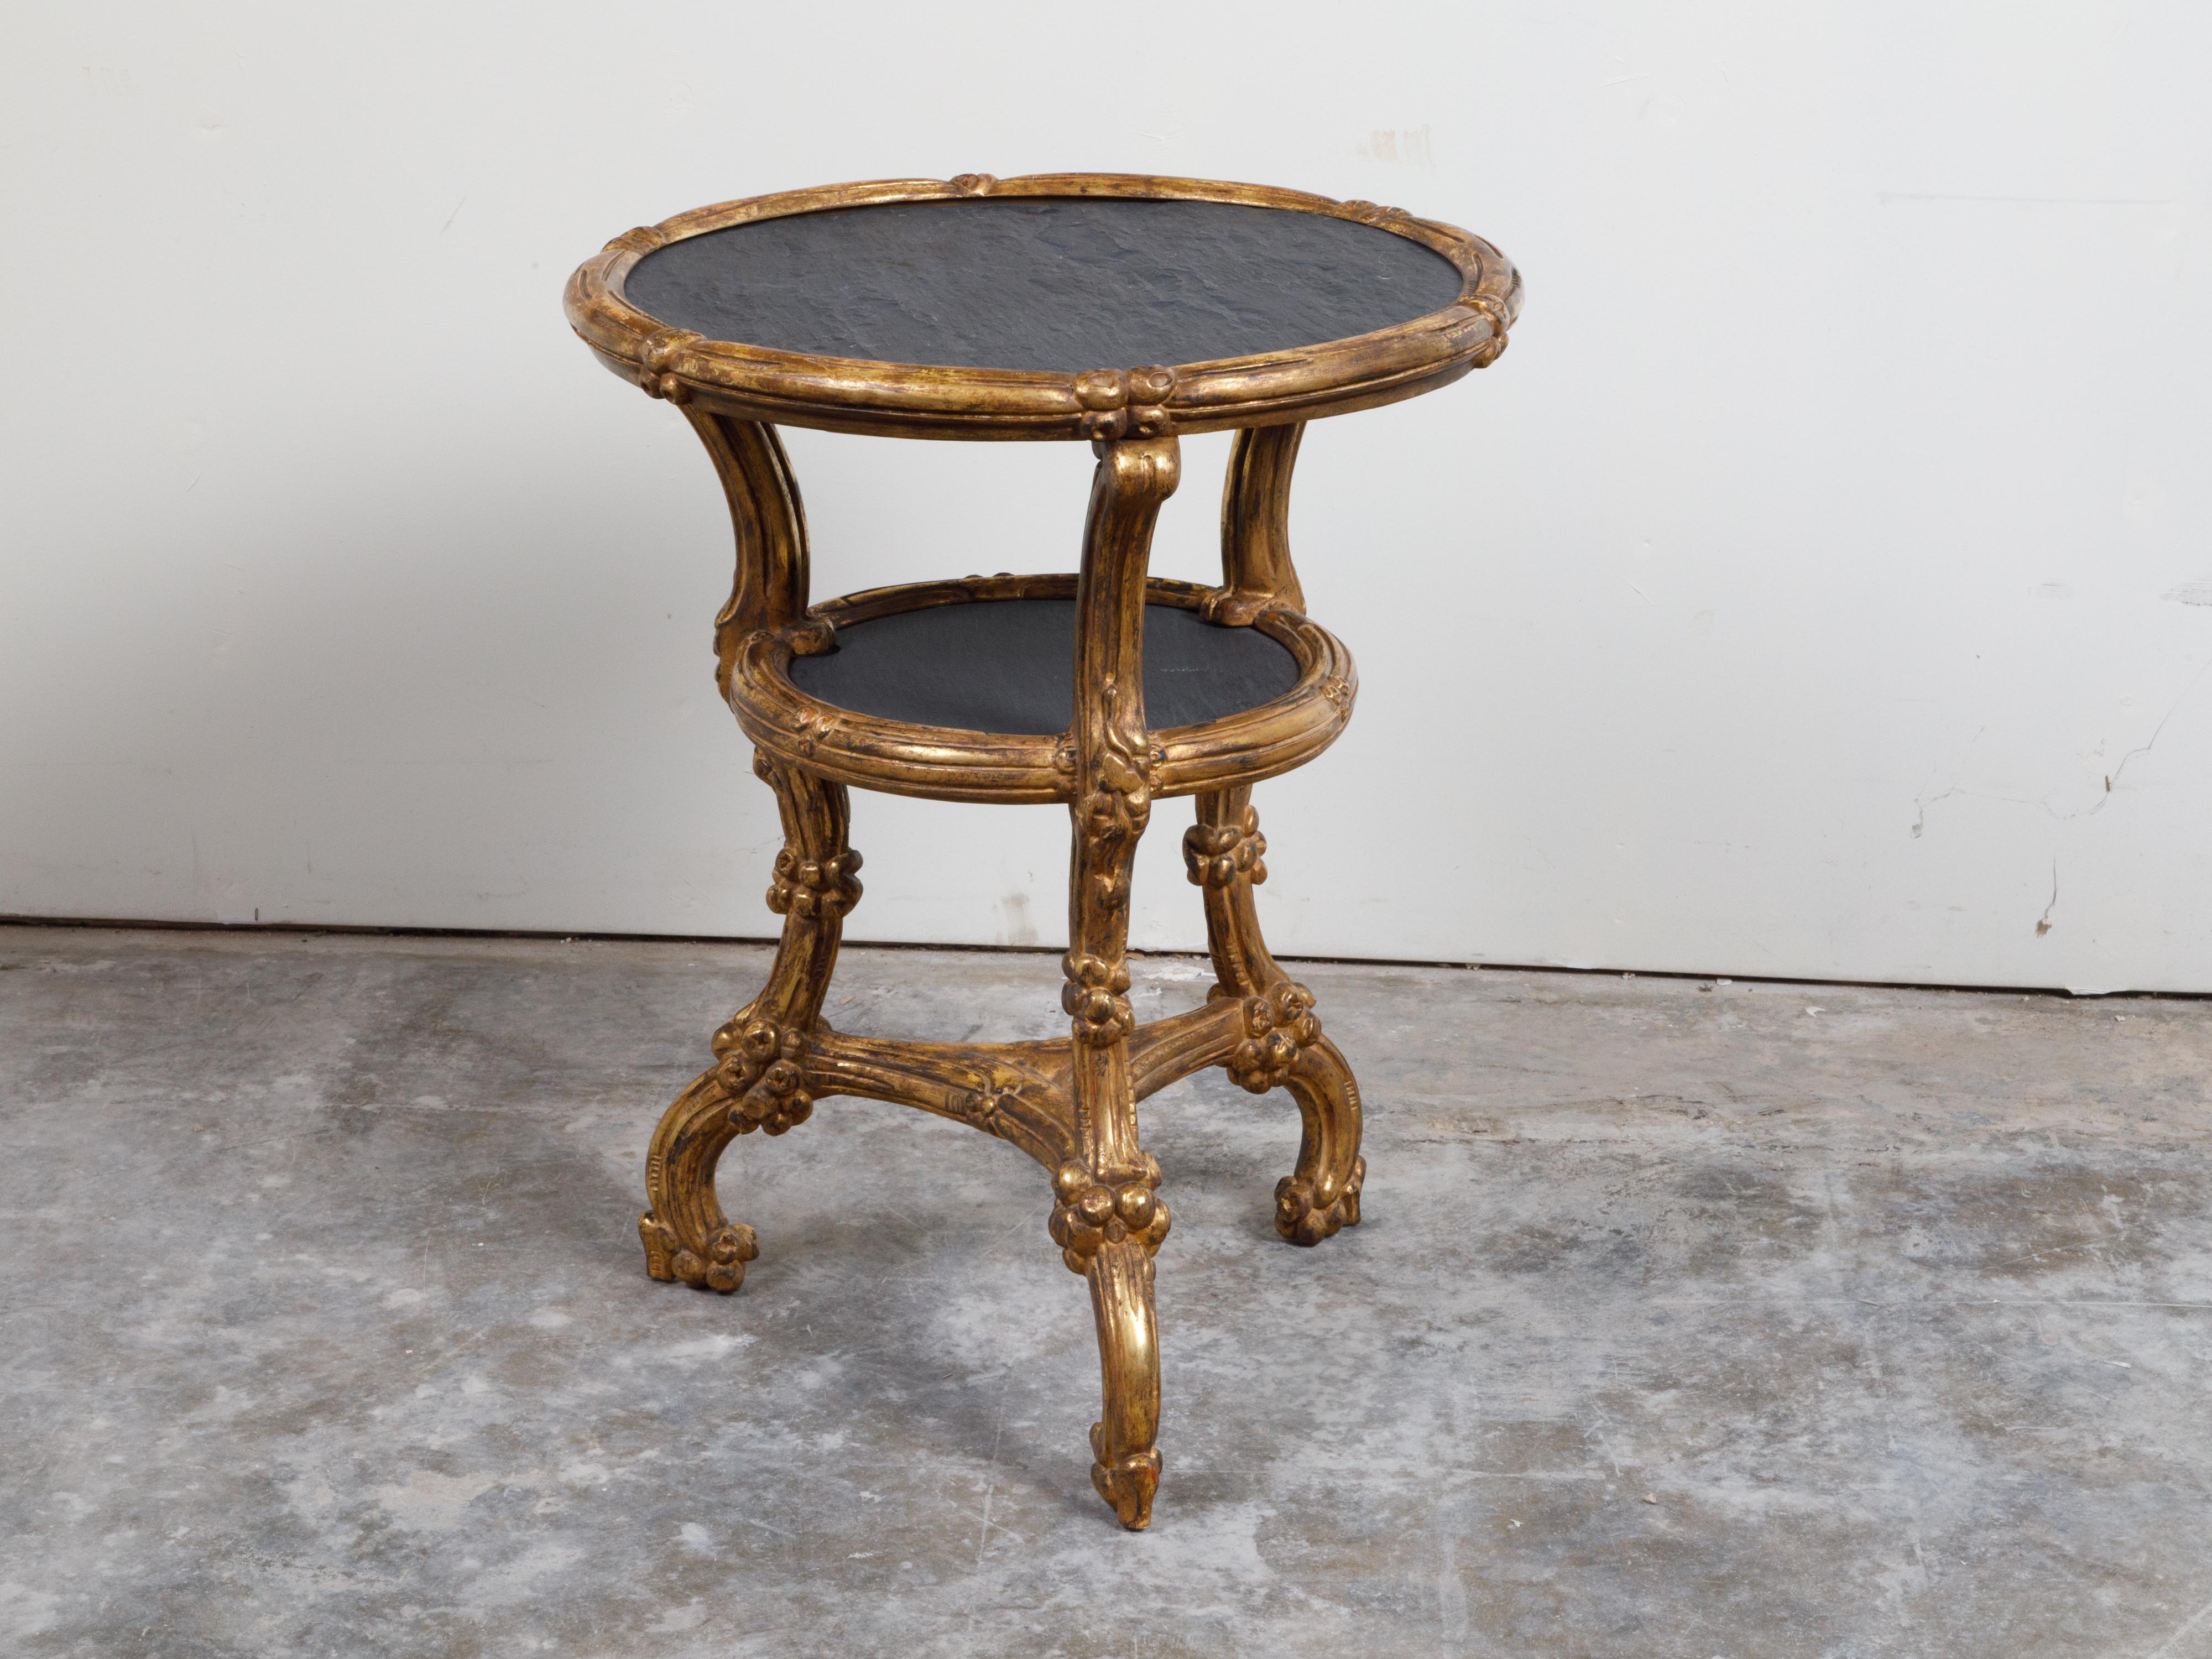 An Italian giltwood side table from the early 20th century, with slate top, shelf and cabriole legs. Created in Italy during the early years of the 20th century, this giltwood side table features a circular slate top resting on three curving